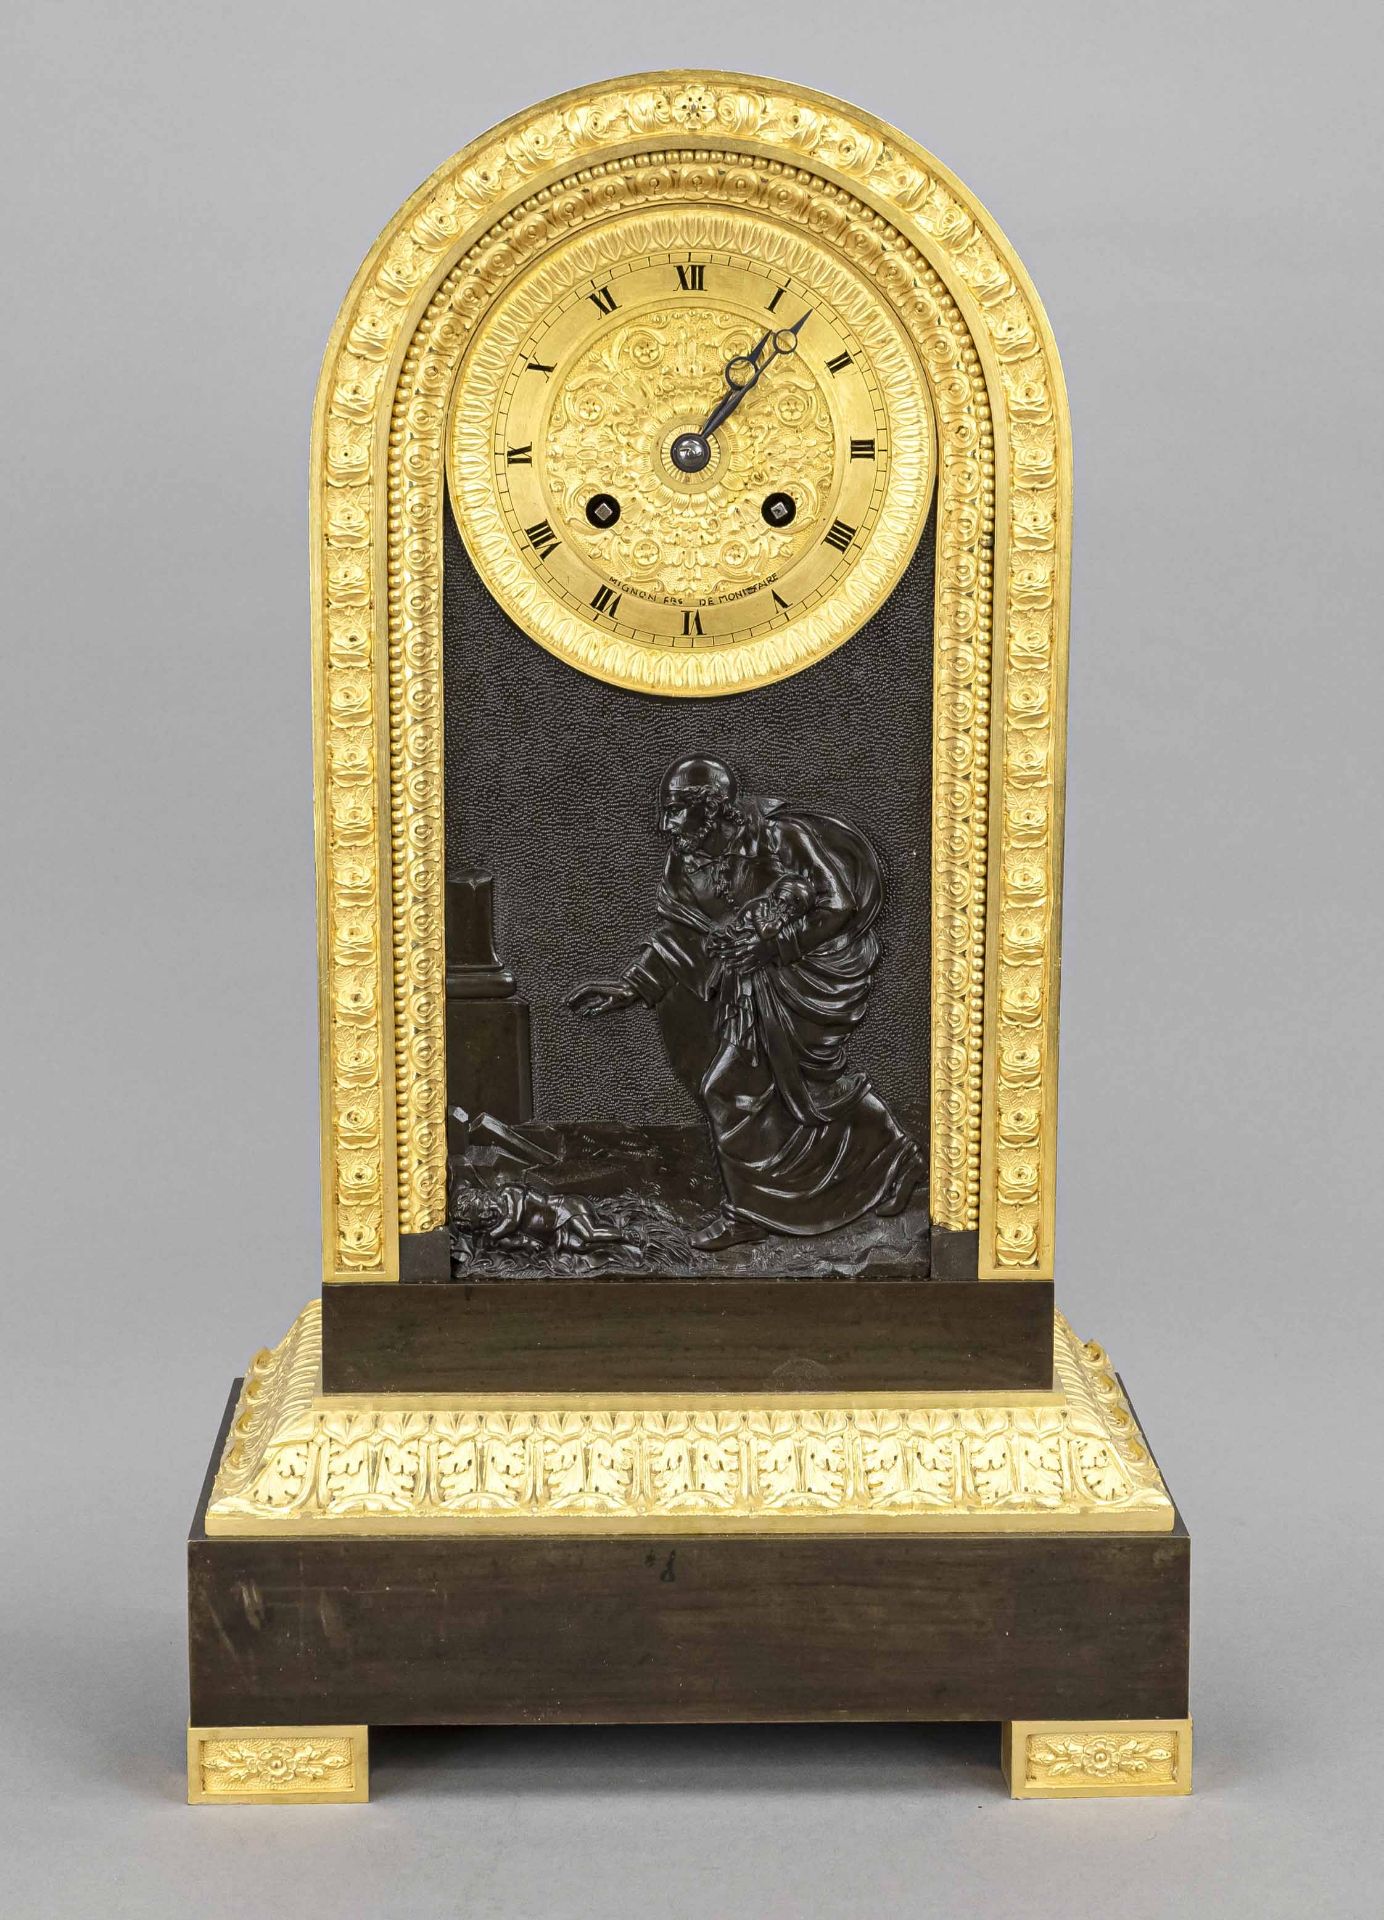 Borné pendulum, bronze and fire-gilt, inscribed on the dial Mignon F.rs. DE Monistaire, decorated